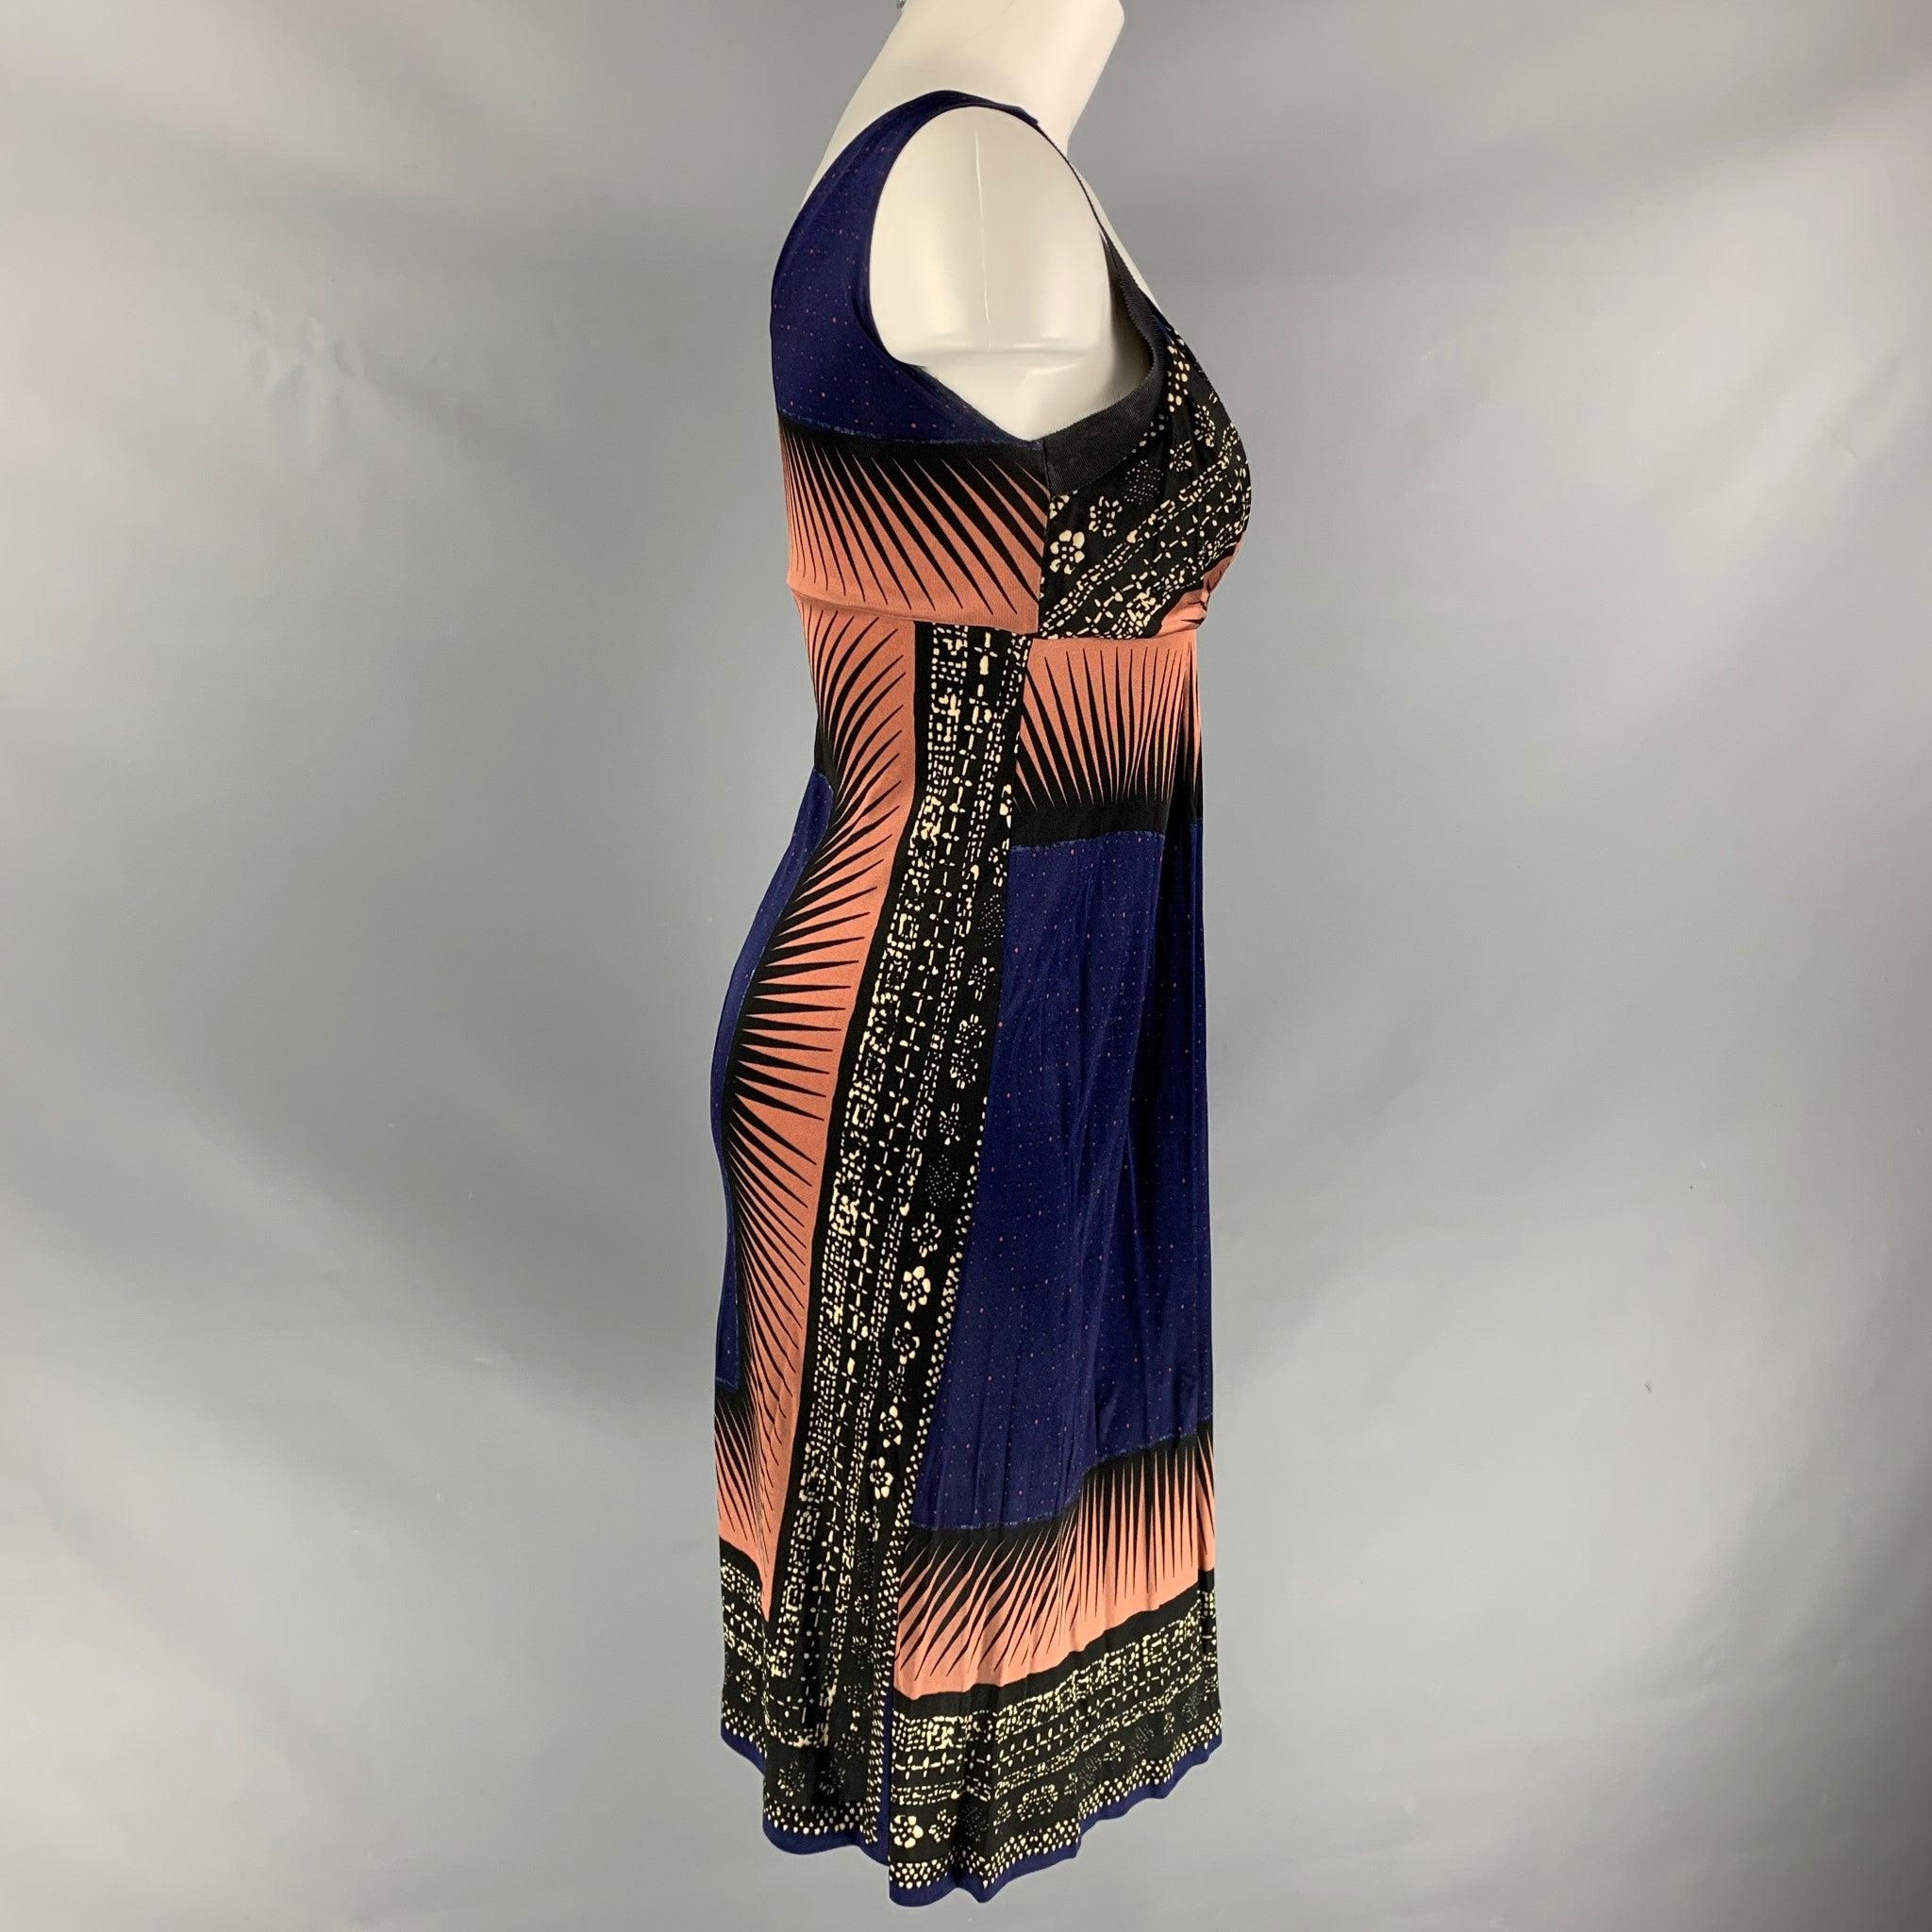 PHILOSOPHY di ALBERTA FERRETTI sleeveless mid-length dress comes in navy brick abstract print rayon fabric featuring a deep v-neck.Good Pre-Owned Condition. Sign of being worn under arms.  

Marked:   2 

Measurements: 
 
Shoulder: 11.5 inBust: 31